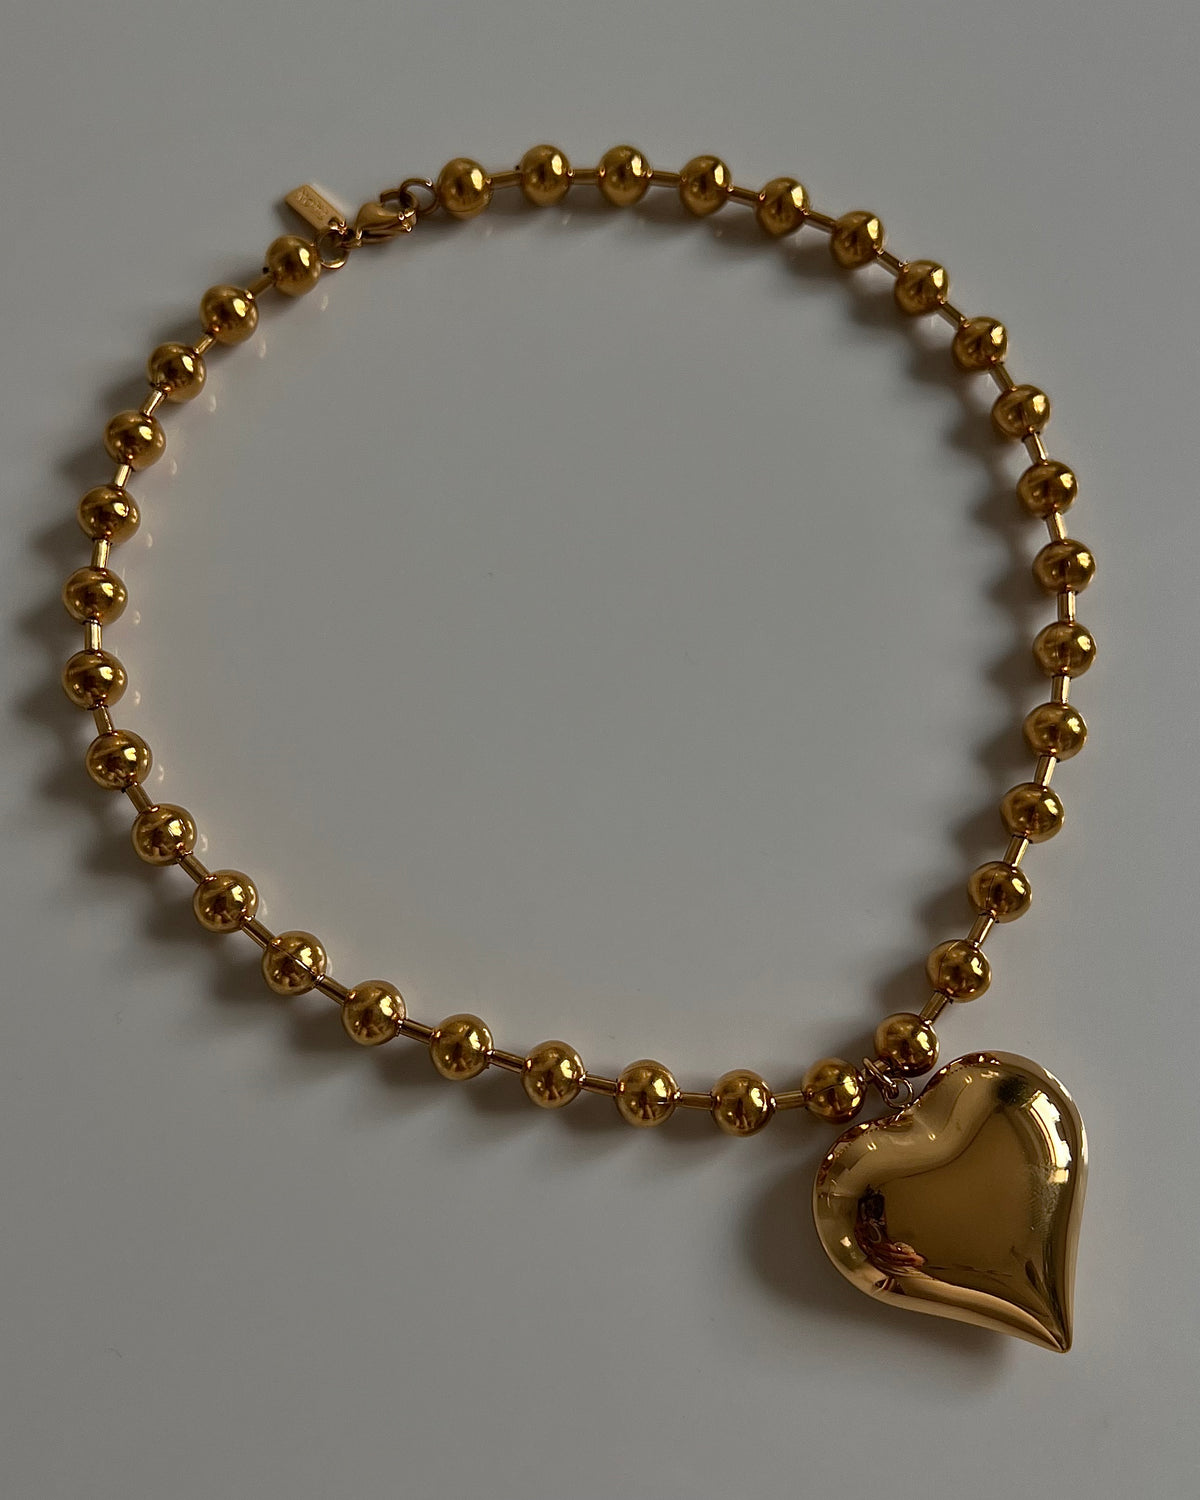 Chubby Heart Necklace